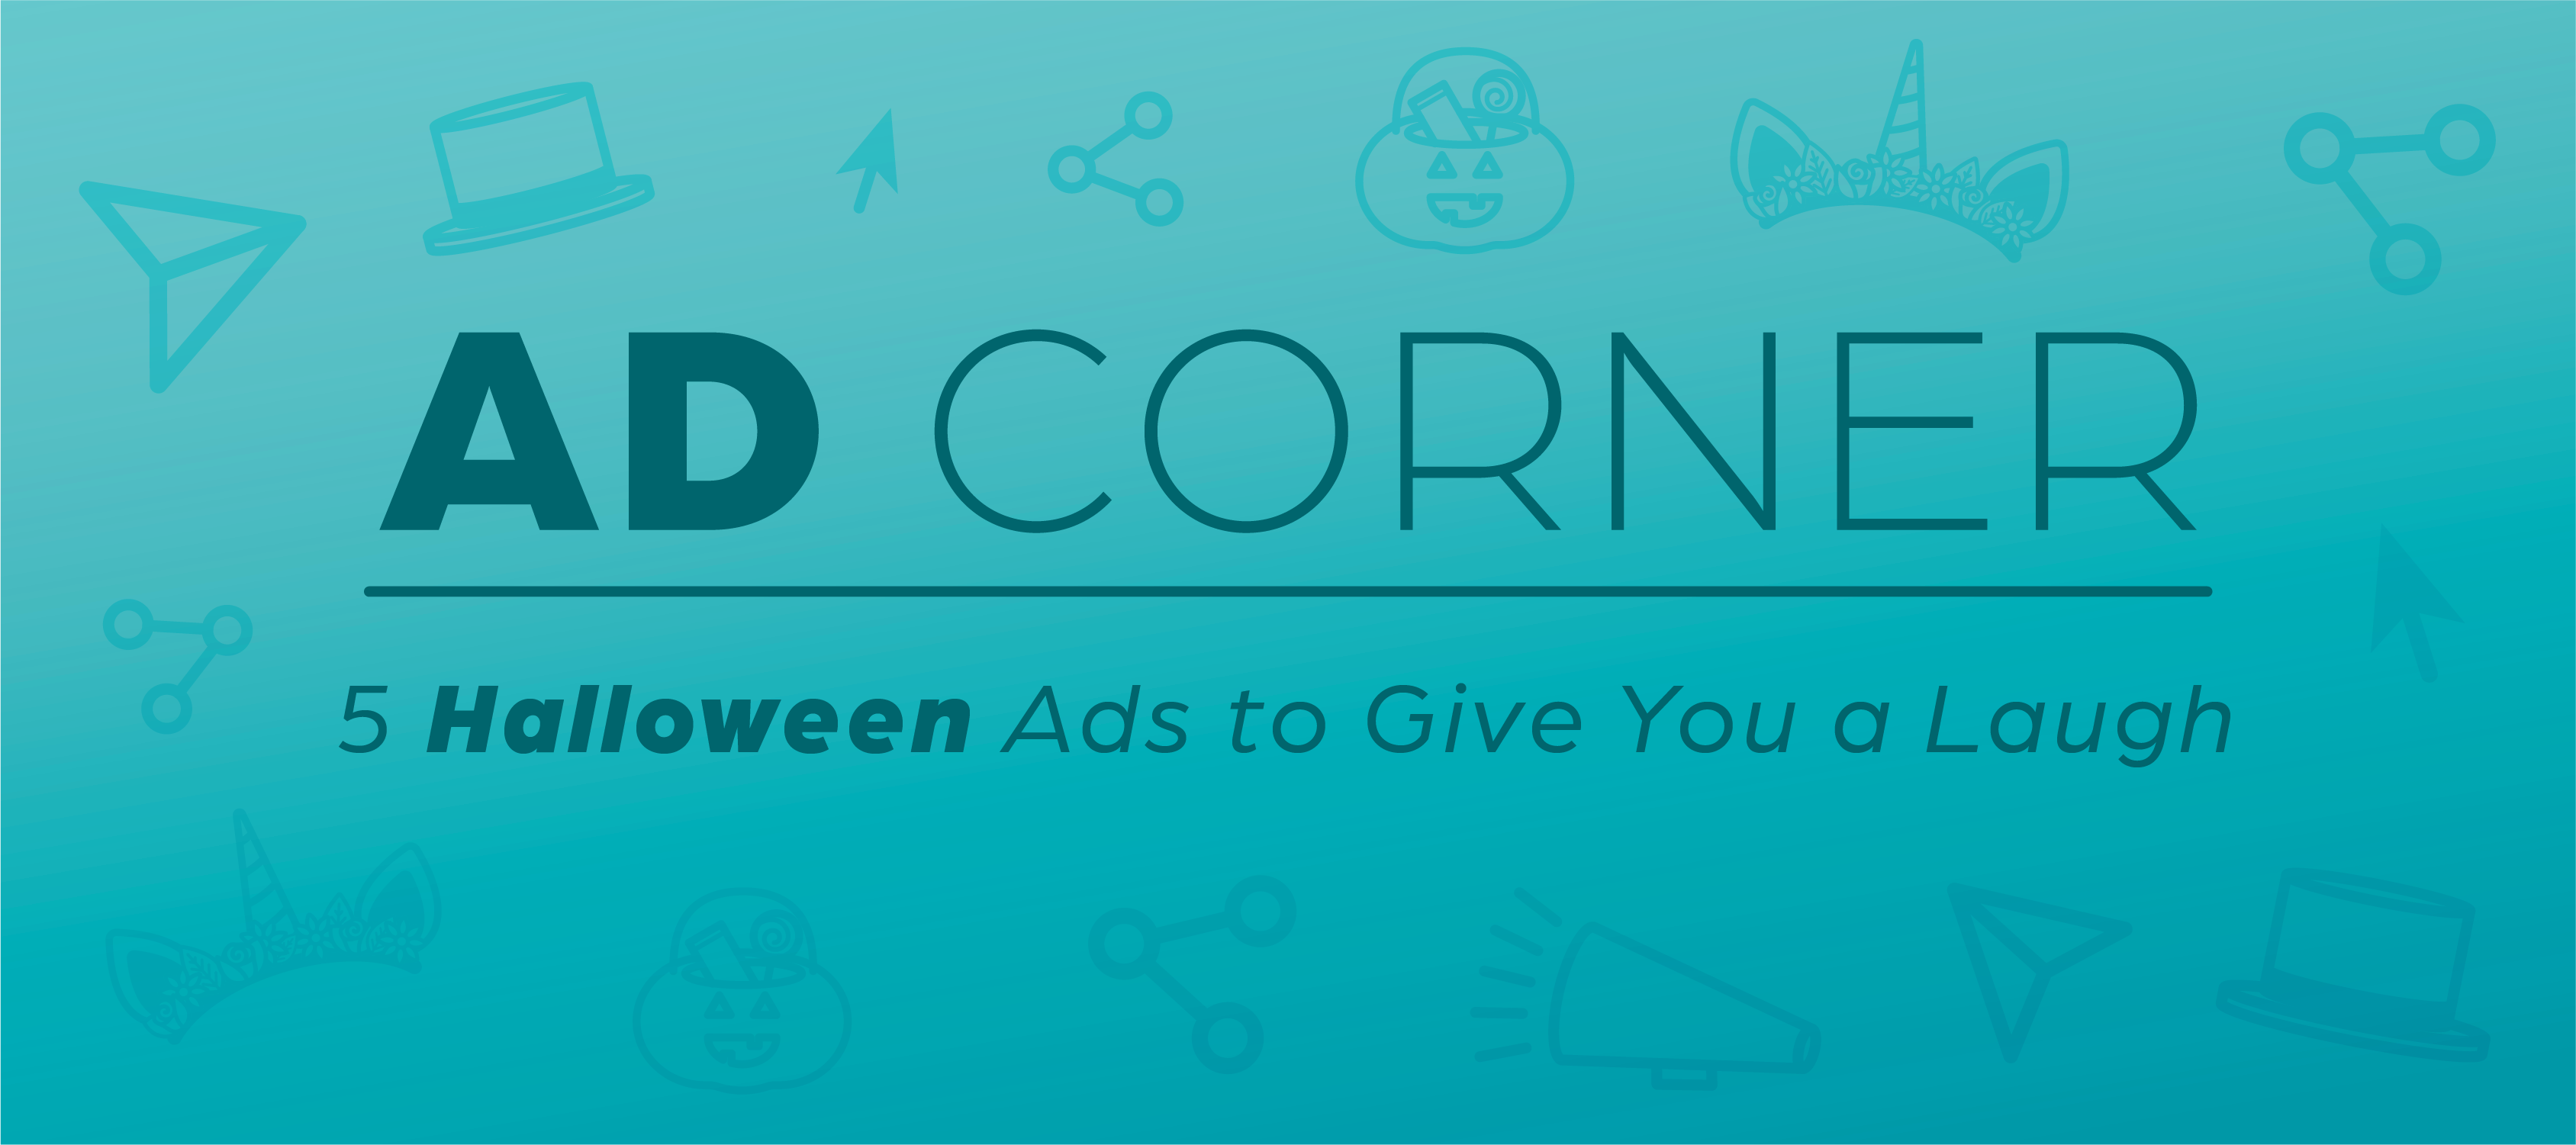 Header image that says "Ad Corner: 5 Halloween Ads to Give You a Laugh"